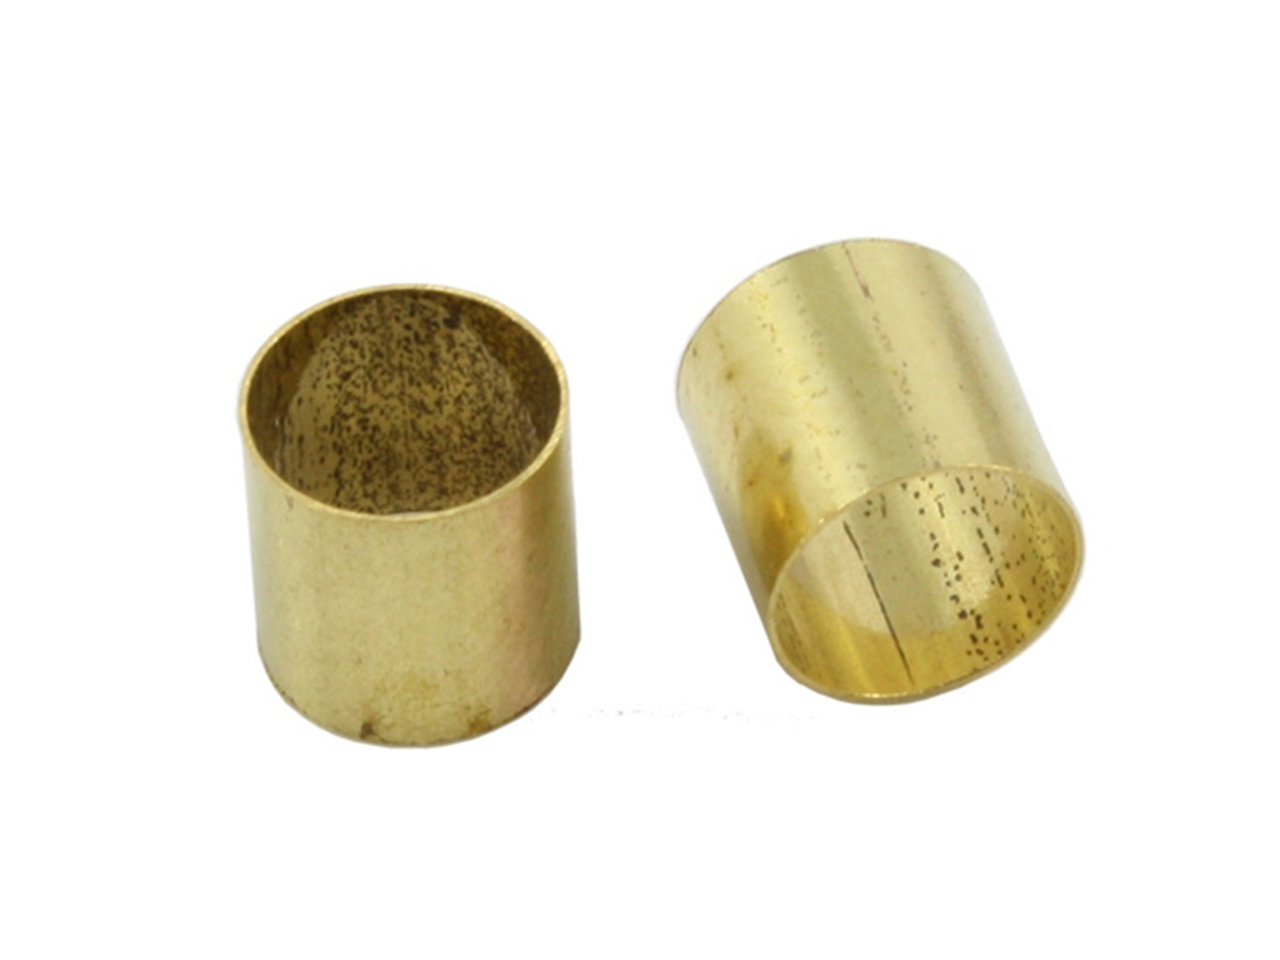 Allparts(オールパーツ) EP-0220-008 / Pack of 5 Brass Pot Sleeves (ポットスリーブ)